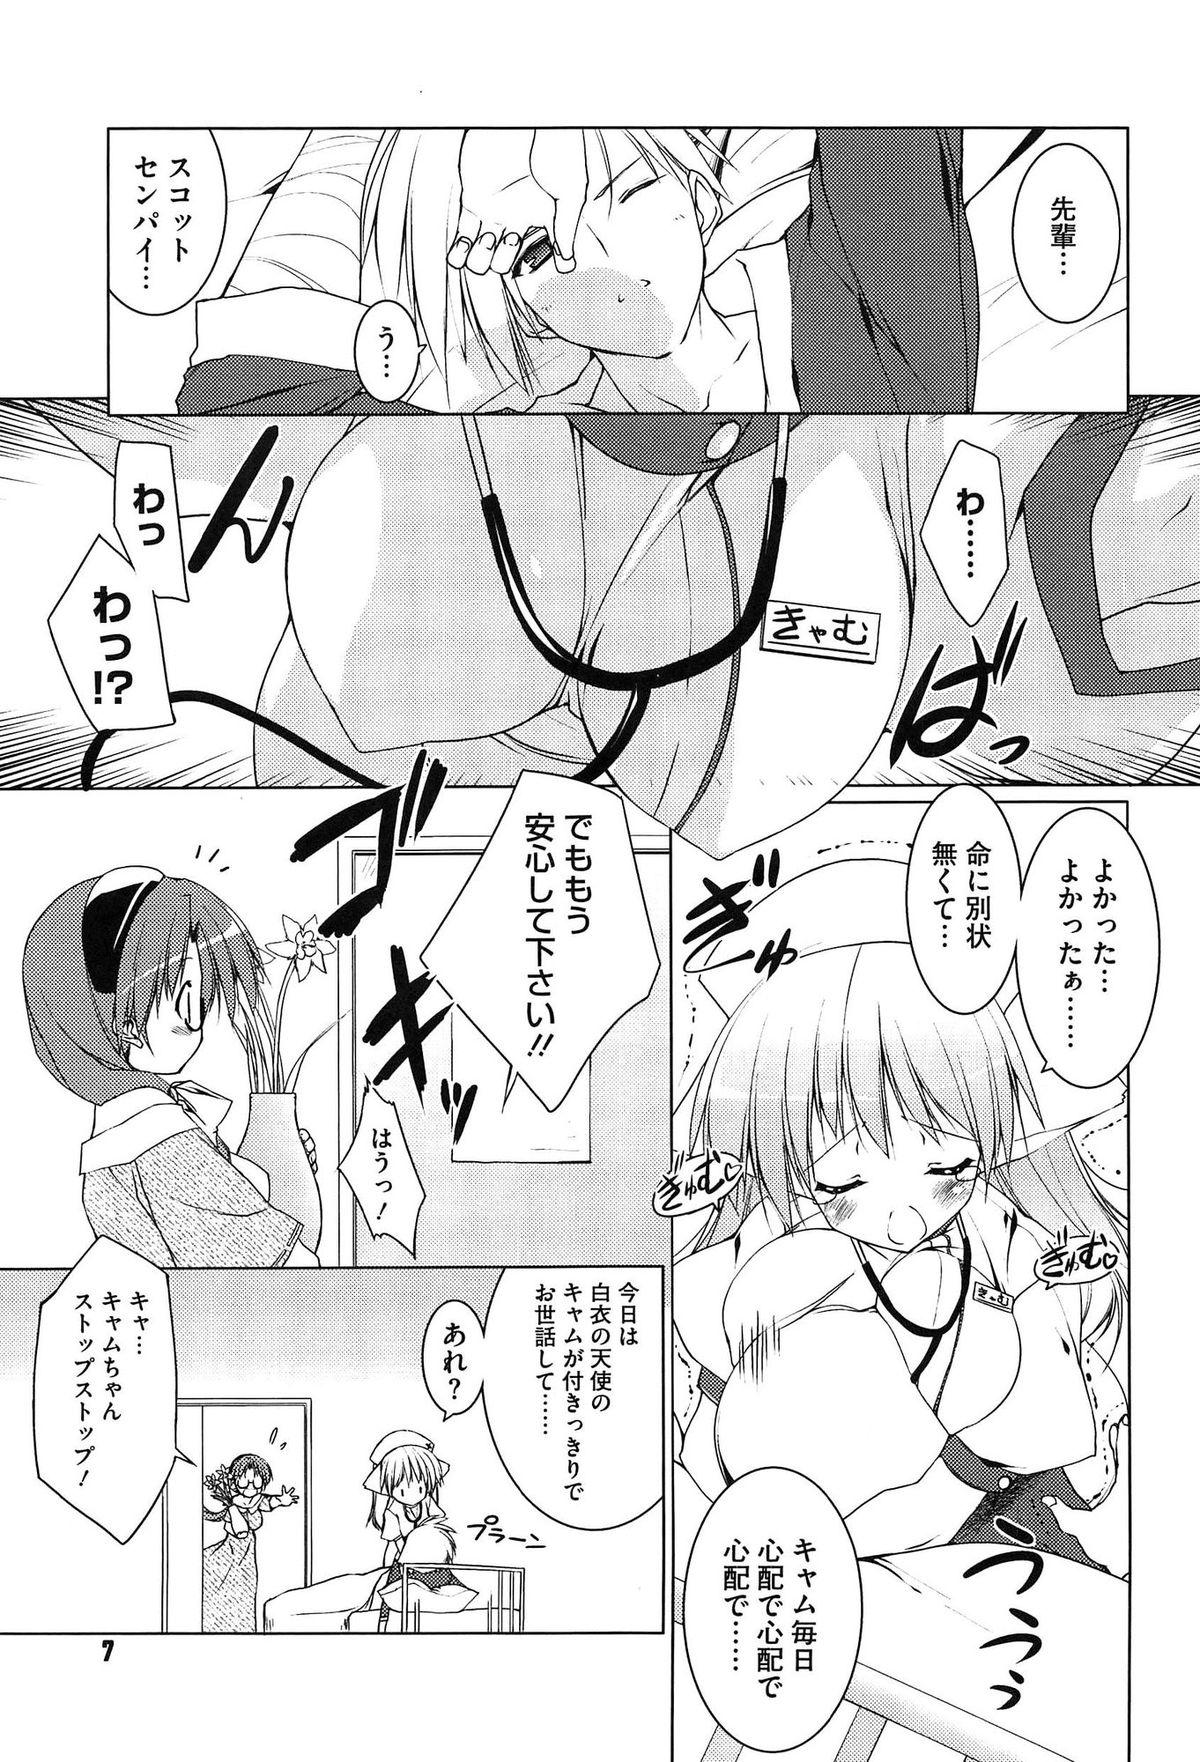 Mmf Newmanoid CAM Vol. 2 Shokai Genteiban Family Roleplay - Page 9